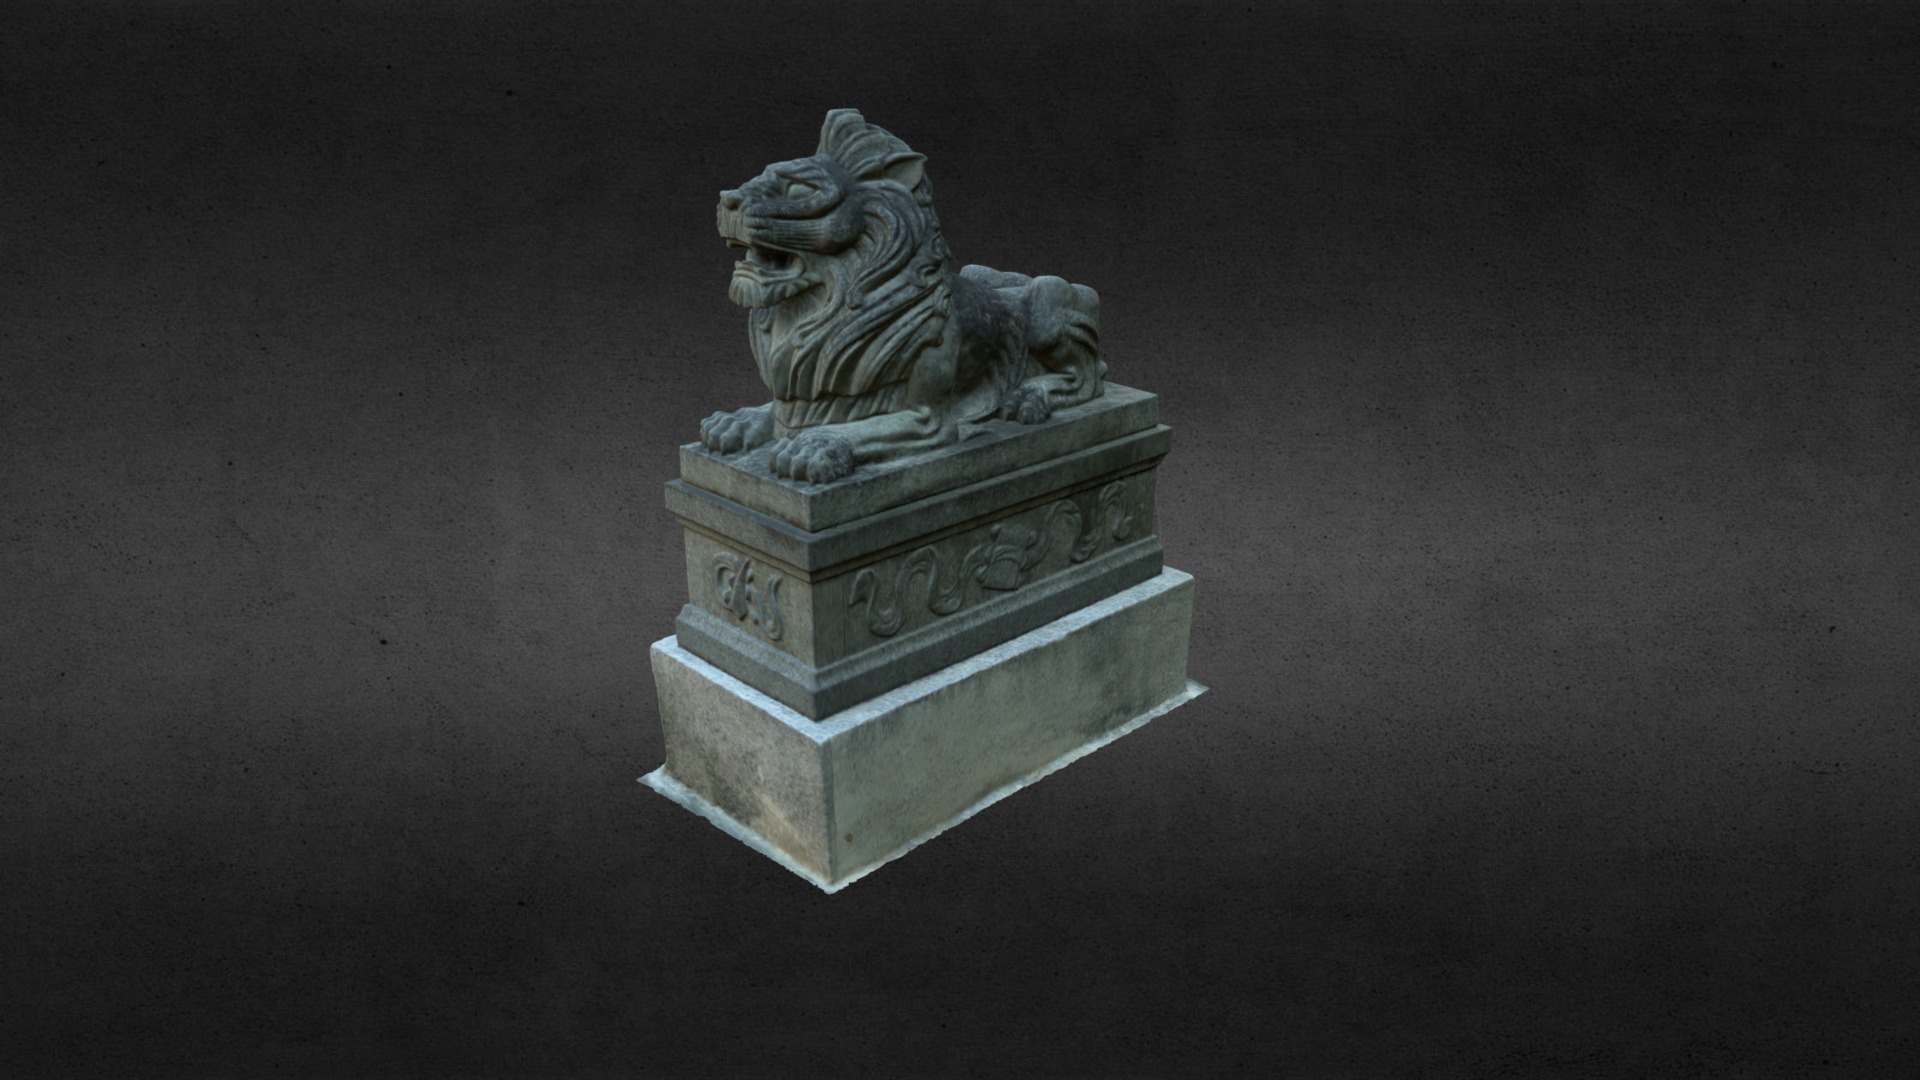 3D model Nai Wai Village – Chinese Lion - This is a 3D model of the Nai Wai Village - Chinese Lion. The 3D model is about a stone statue on a black surface.